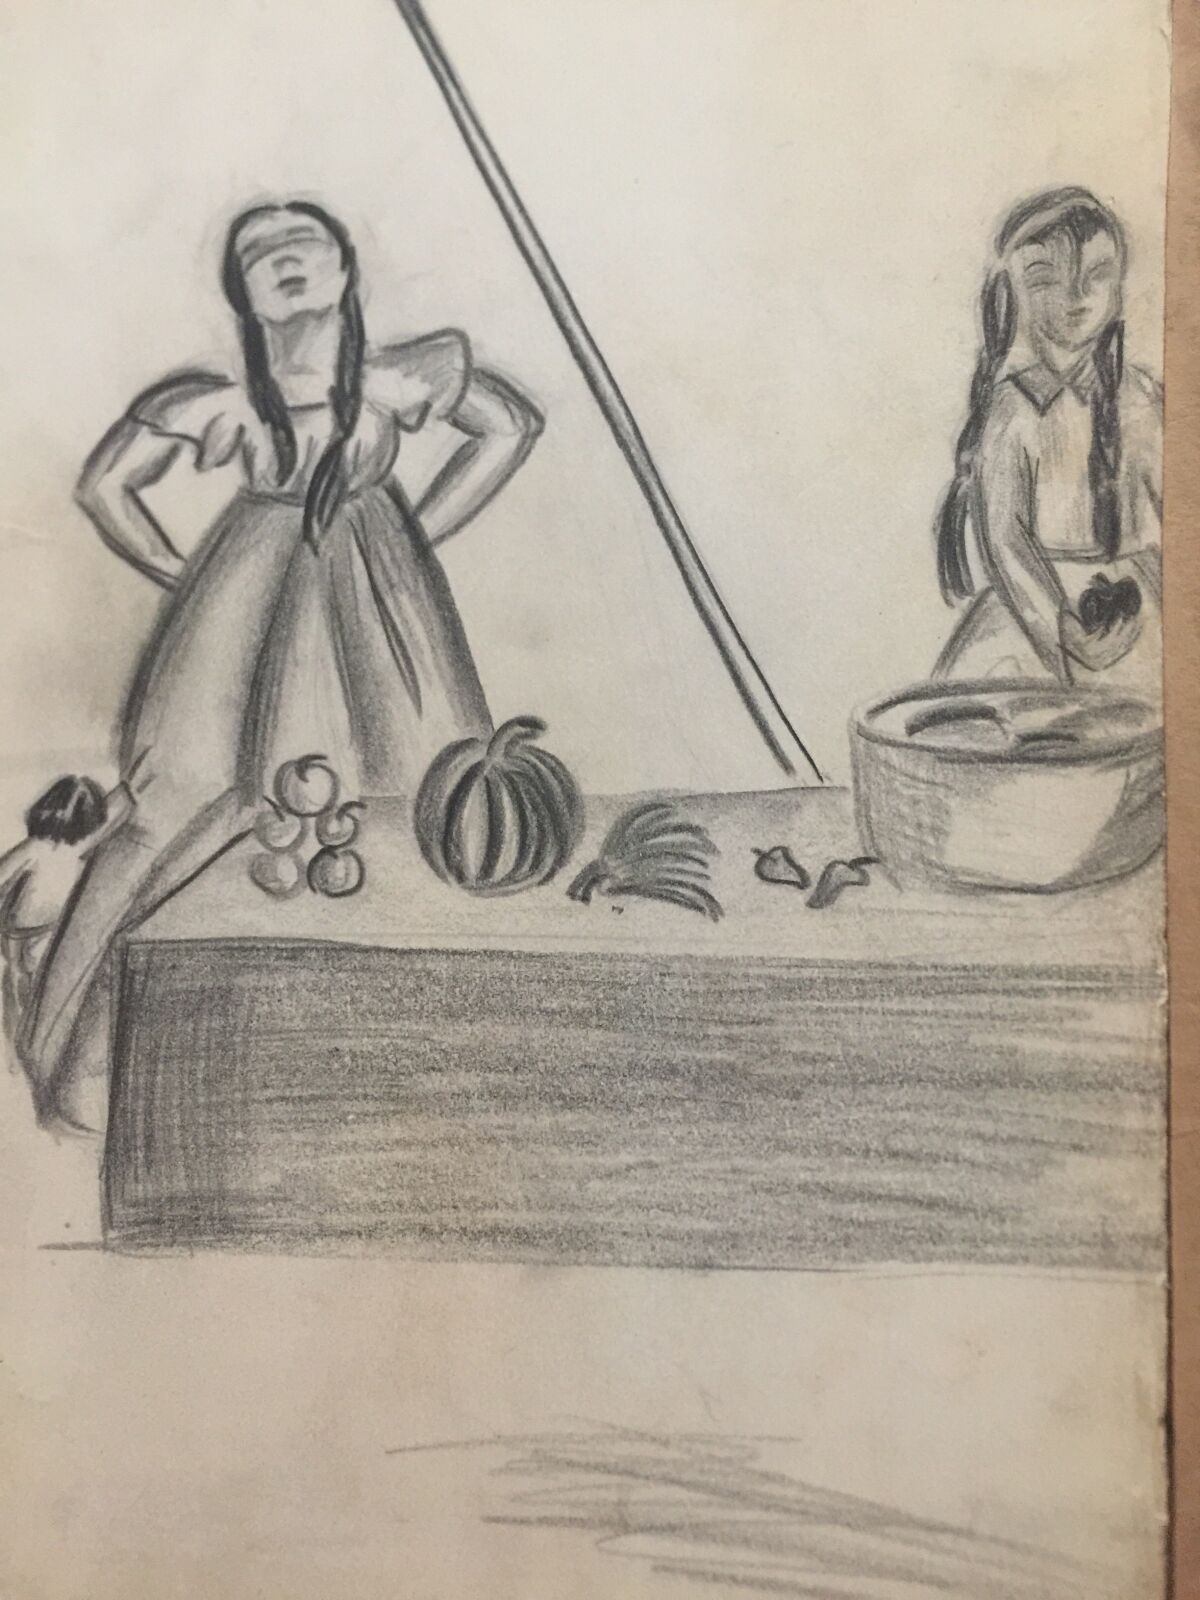 A drawing by a teenage Judith Horton, who became Judith Munk.